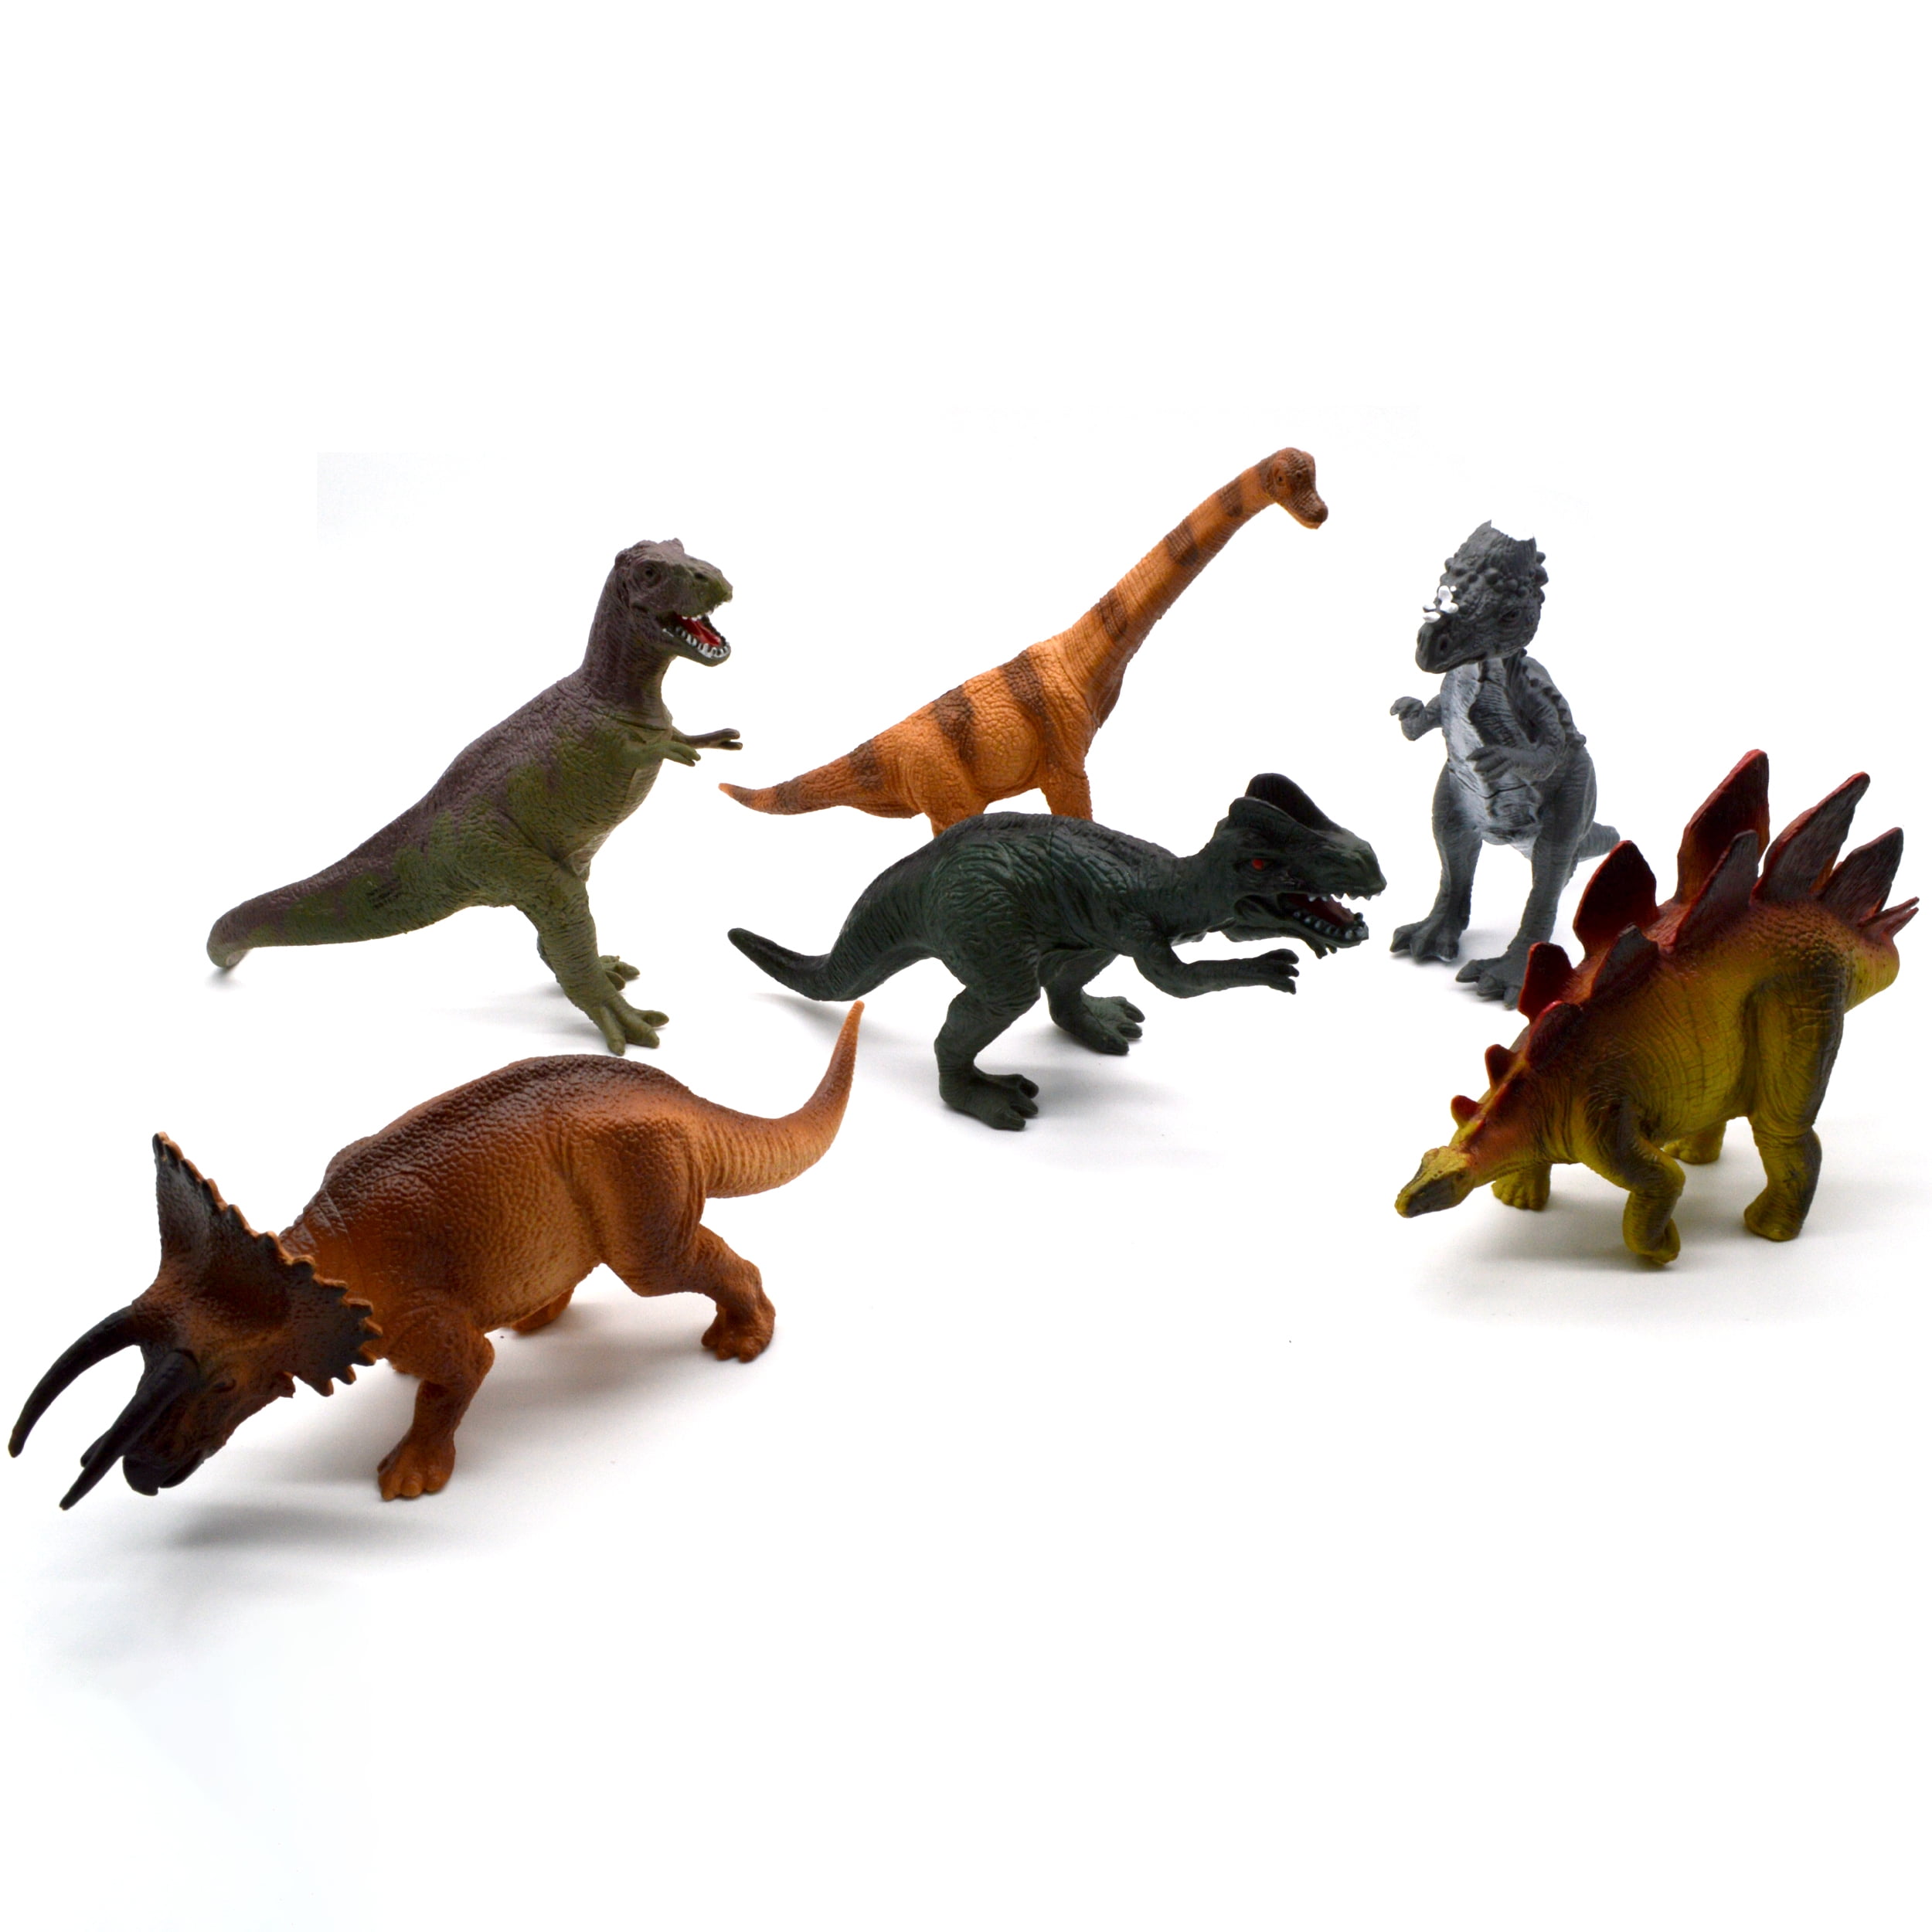 Dinosaur Toy Playset 60 PC W 26 Educational Realistic Figures for Boys Fabric PL for sale online 